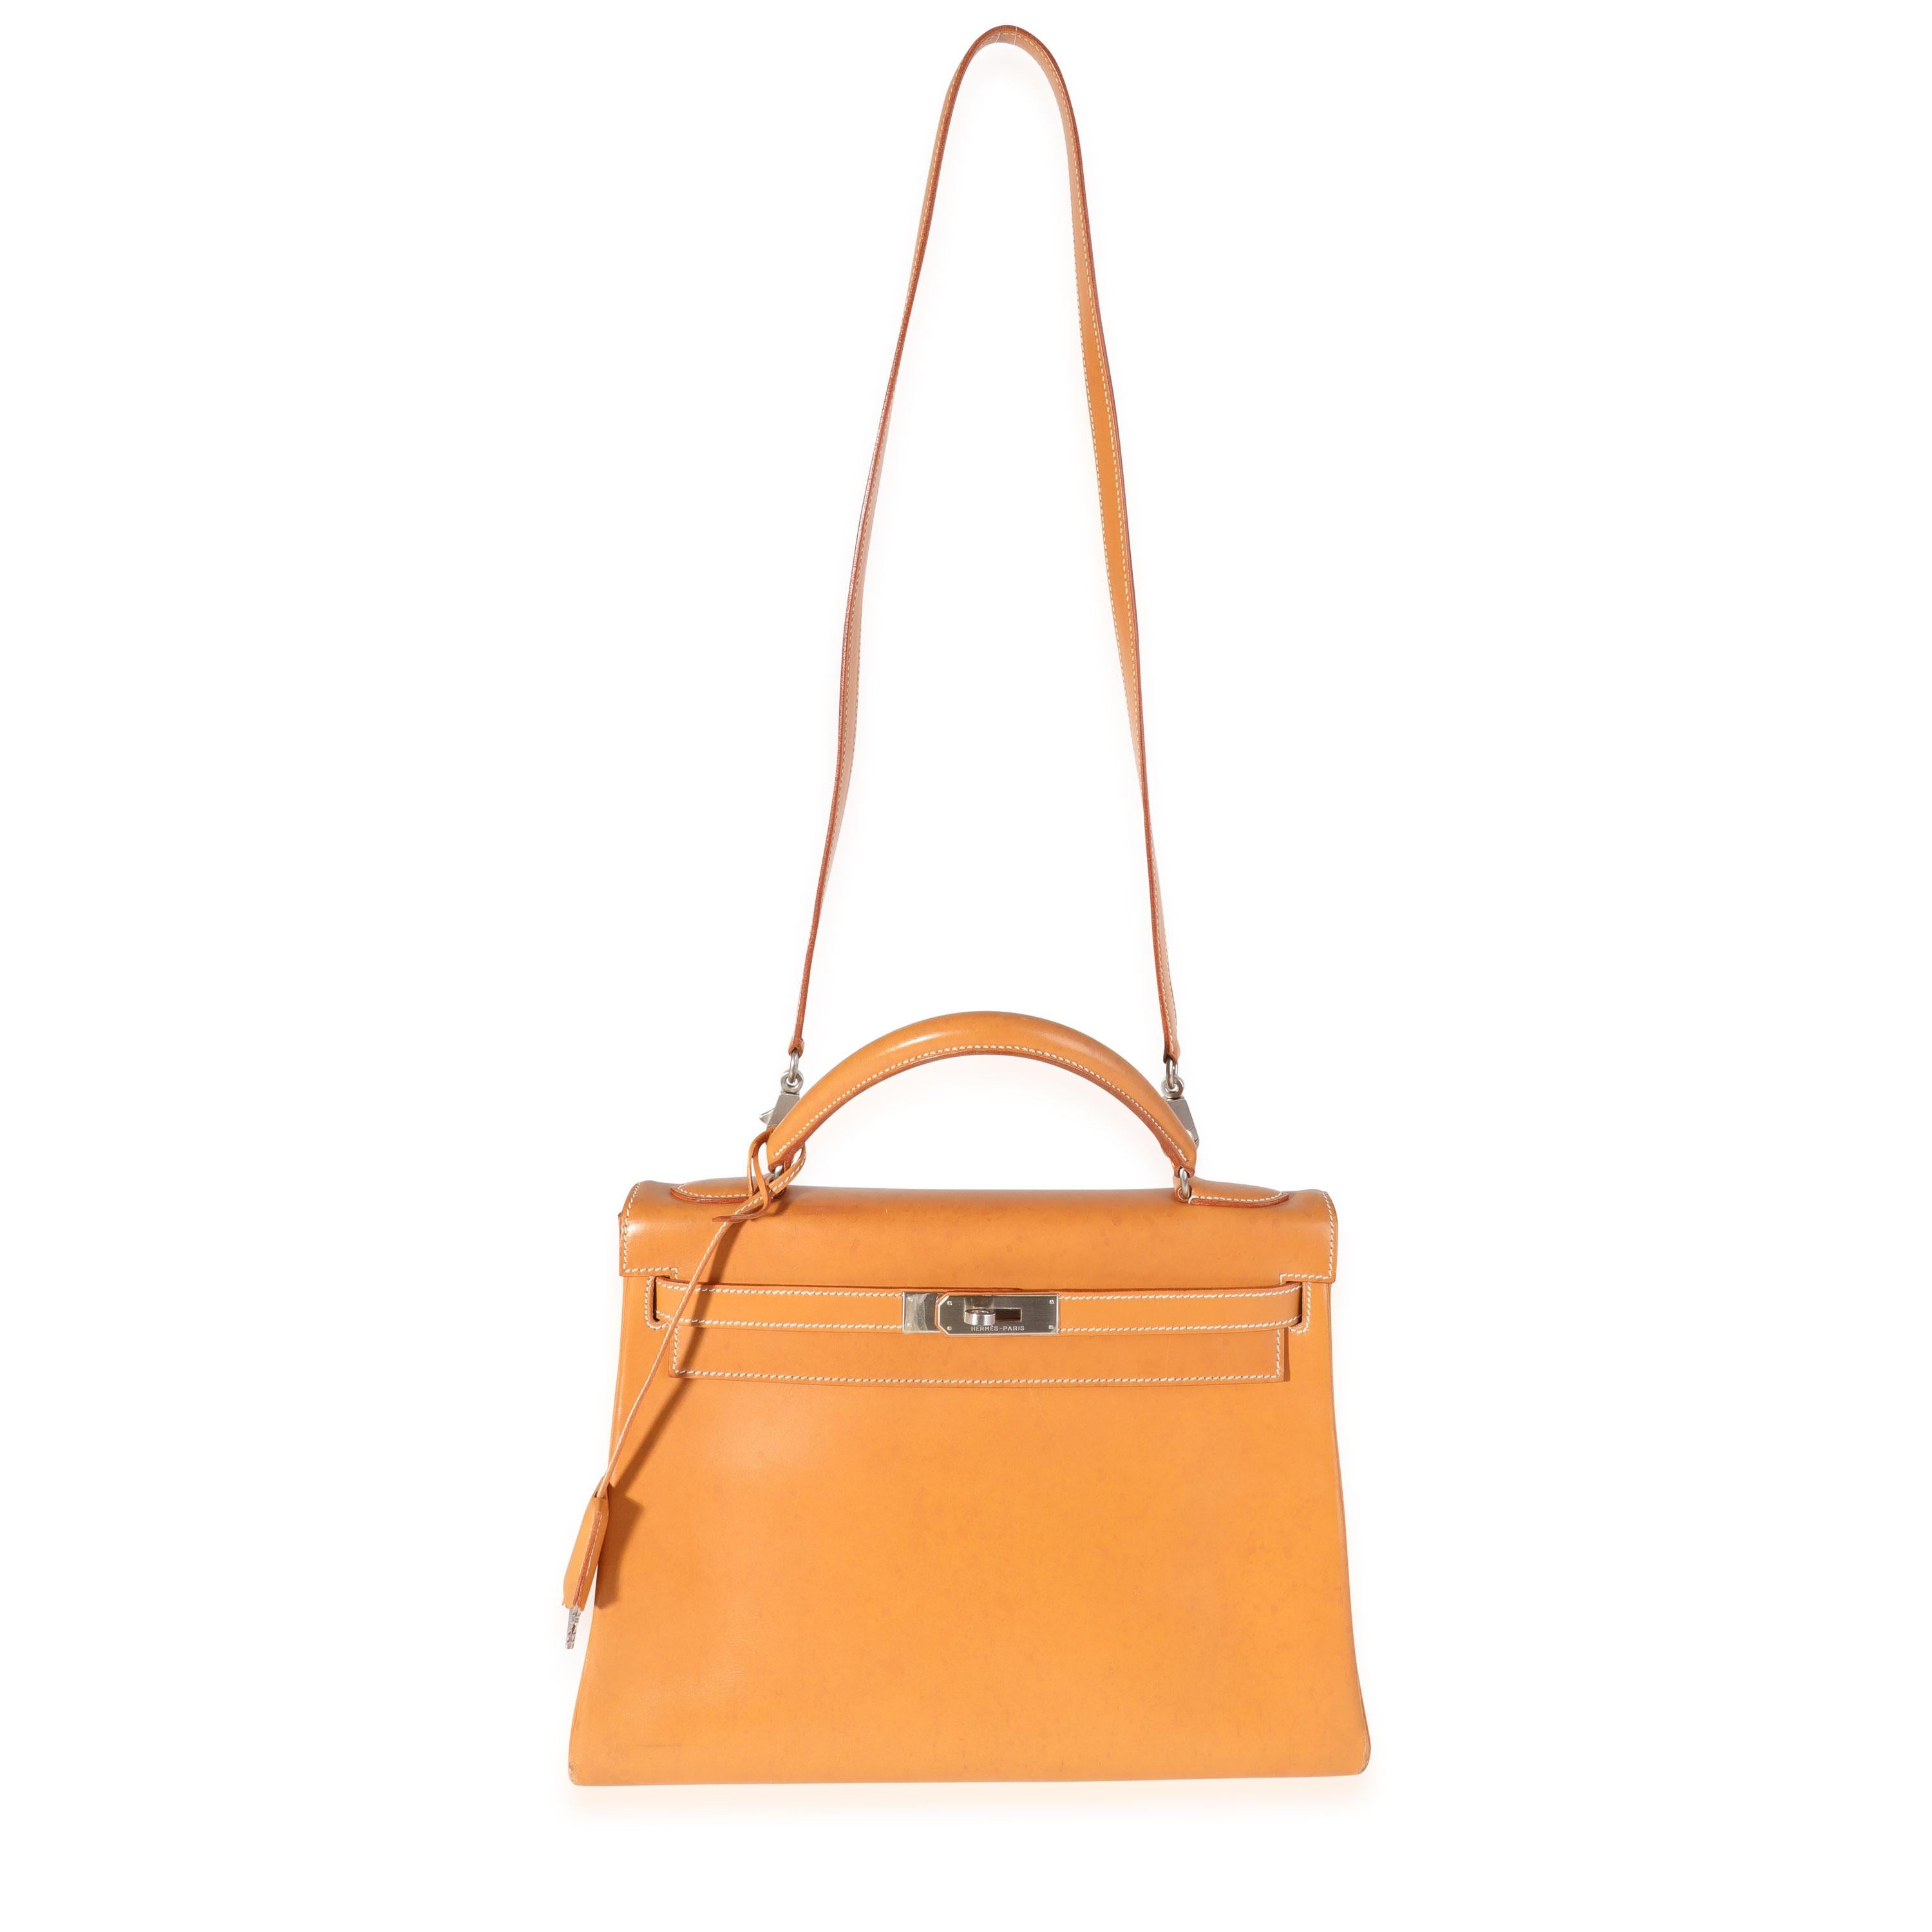 Listing Title: Hermès Natural Vache Retourne Kelly 32 BPHW
SKU: 119423
Condition: Pre-owned (3000)
Handbag Condition: Good
Condition Comments: Good Condition. Plastic on some hardware. Scuffing to corners. Watermarks, discoloration, and scuffing